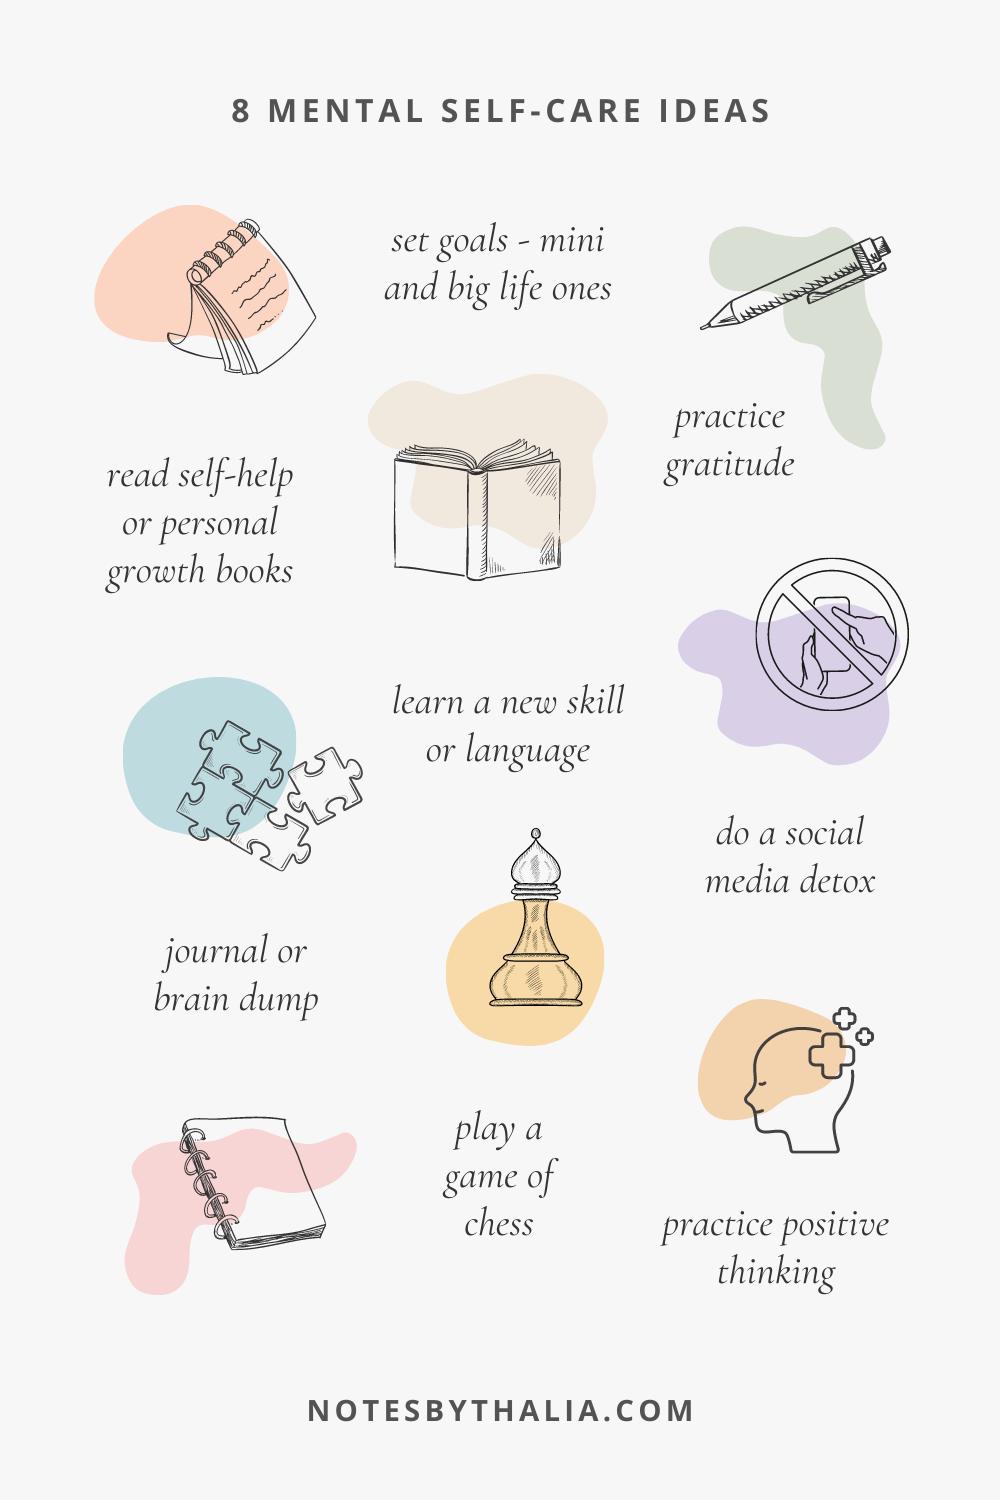 A set of eight mental self-care ideas including reading self-help books, setting goals, practicing gratitude, learning a new skill, doing a social media detox, journaling, playing chess, and practicing positive thinking.